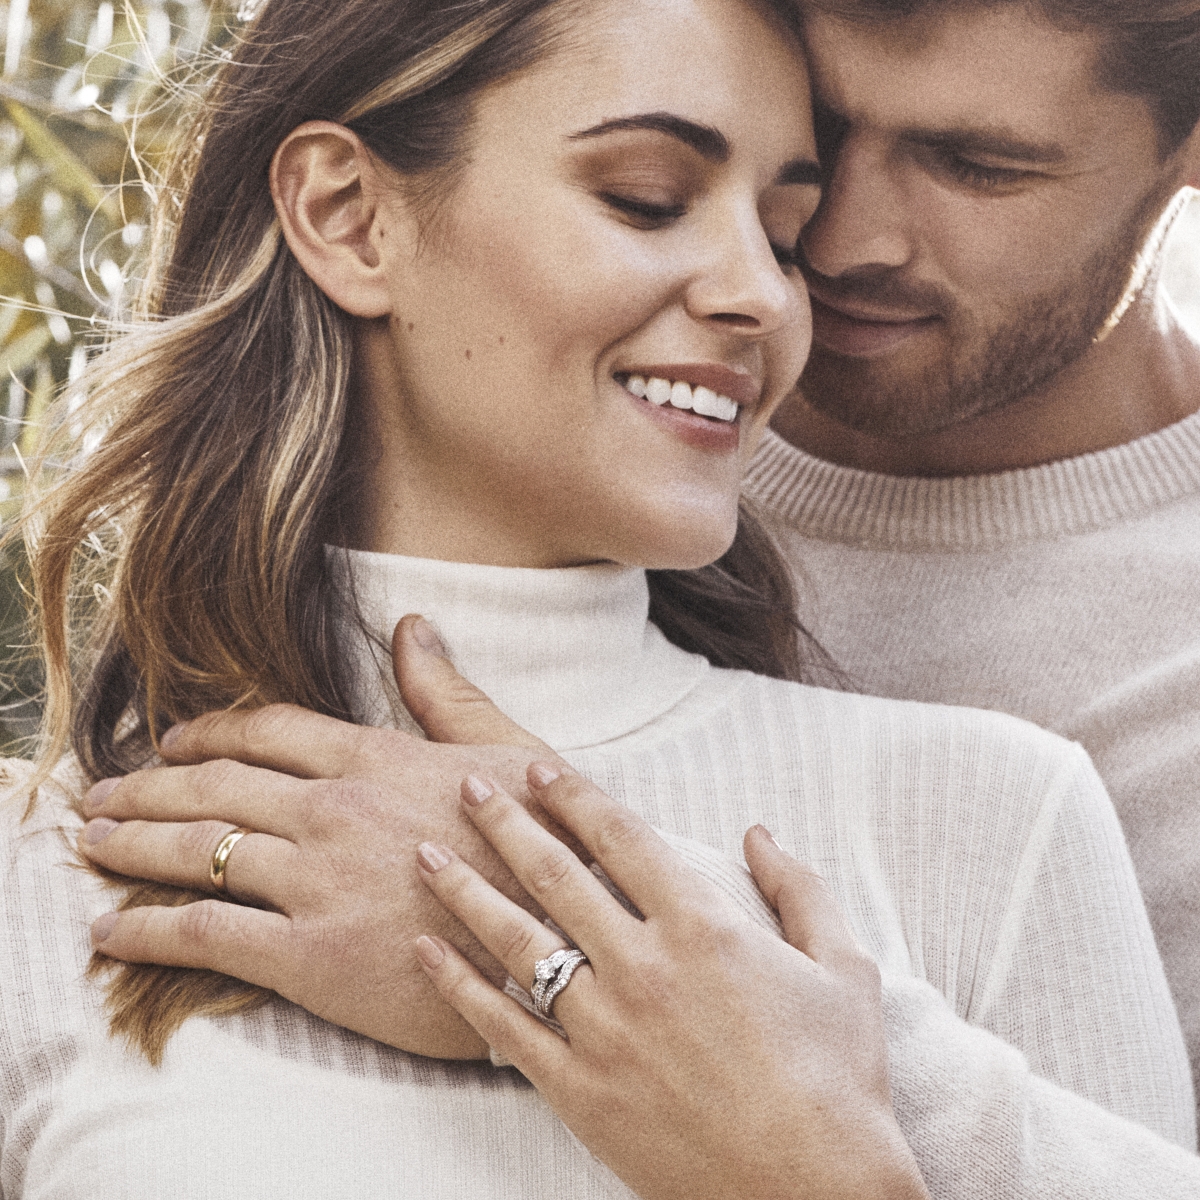 💍Calling all engaged couples!💍 Join Ernest Jones for their wedding event this weekend for amazing offers and competitions!